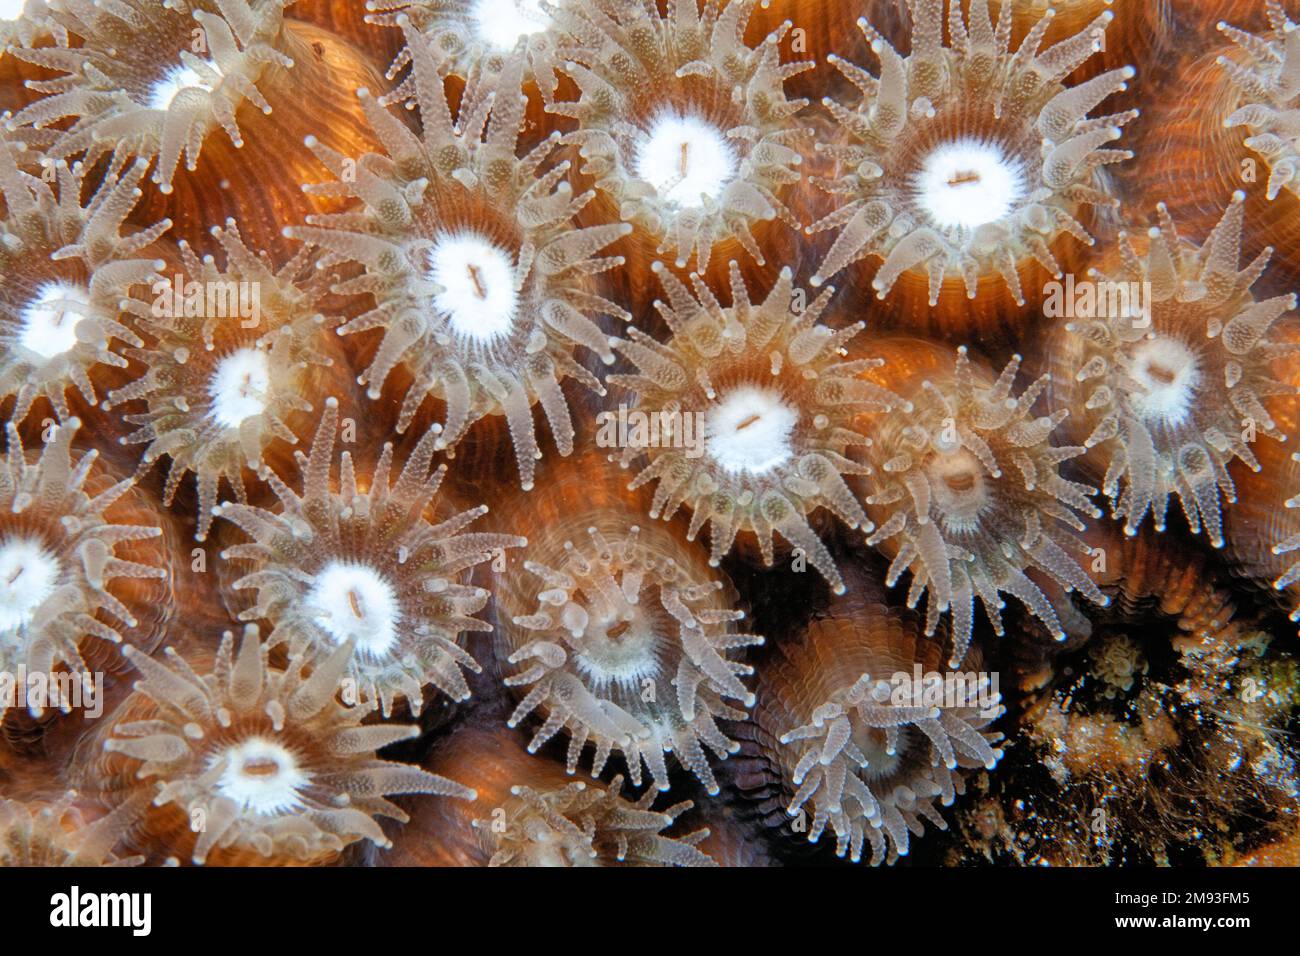 Astreopora is a genus of stony corals in the Acroporidae family. Members of the genus are commonly known as star corals, open polyp at night Stock Photo